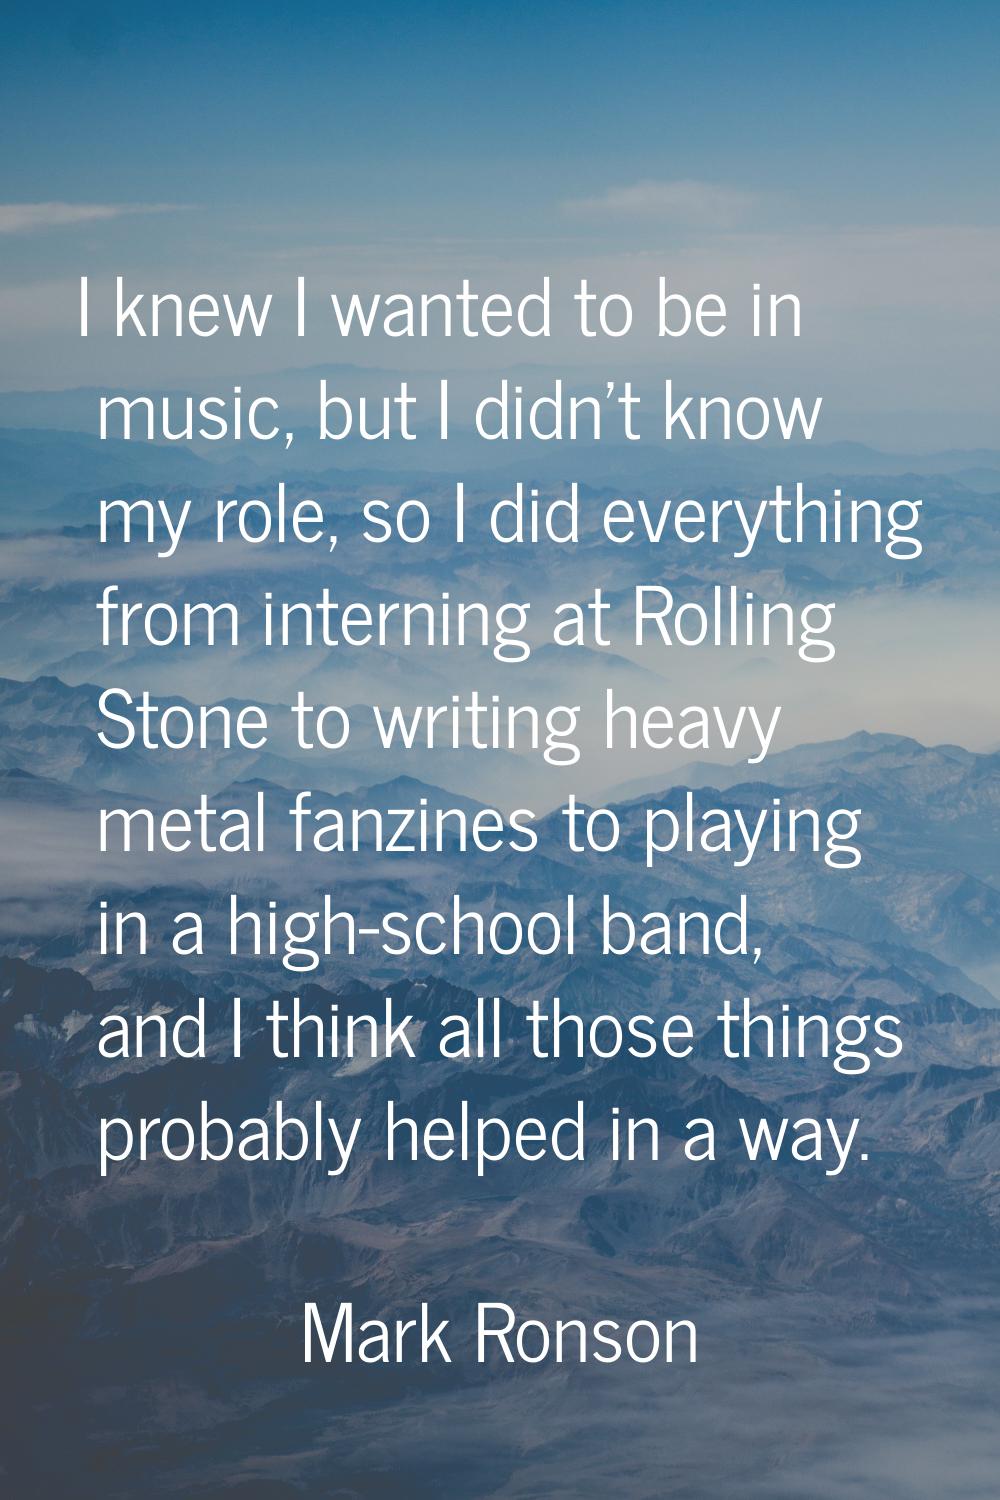 I knew I wanted to be in music, but I didn't know my role, so I did everything from interning at Ro